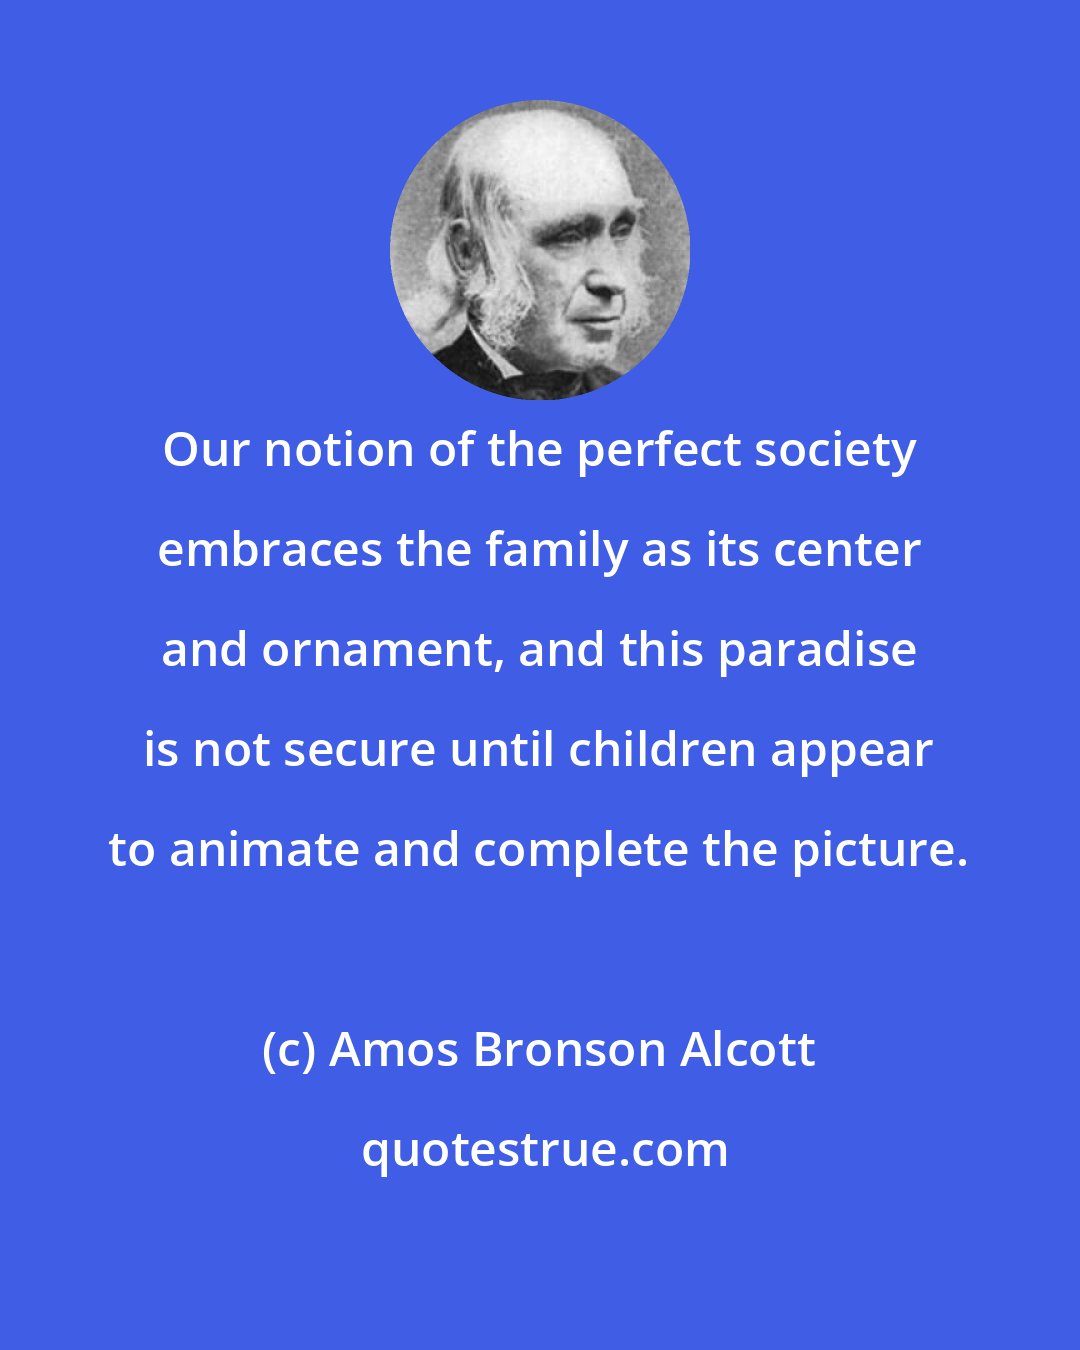 Amos Bronson Alcott: Our notion of the perfect society embraces the family as its center and ornament, and this paradise is not secure until children appear to animate and complete the picture.